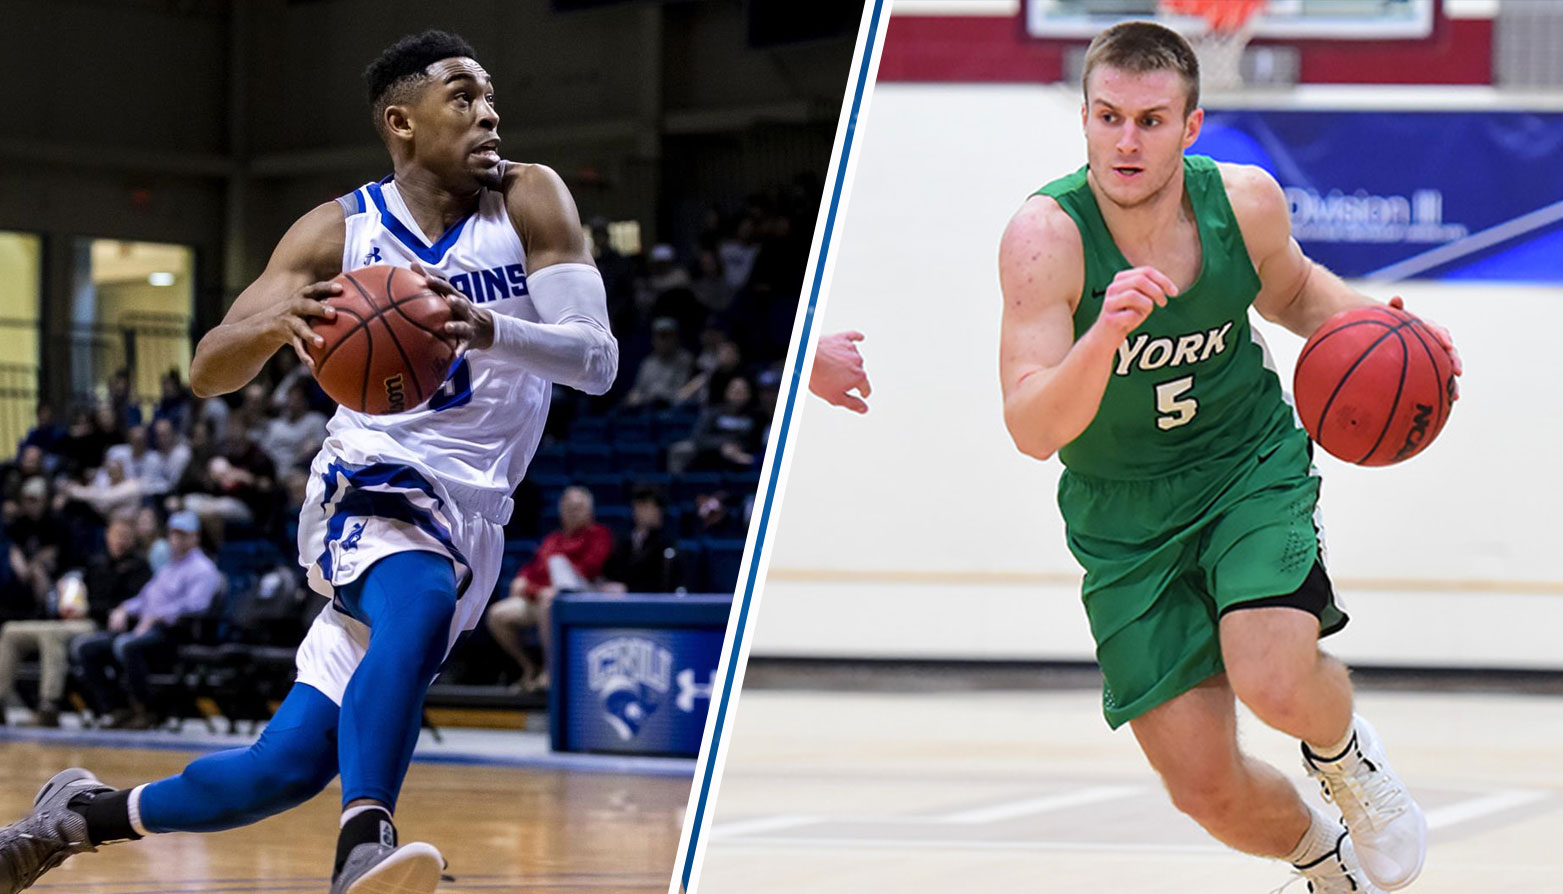 Christopher Newport & York to Battle in Rematch for CAC Men's Basketball Championship